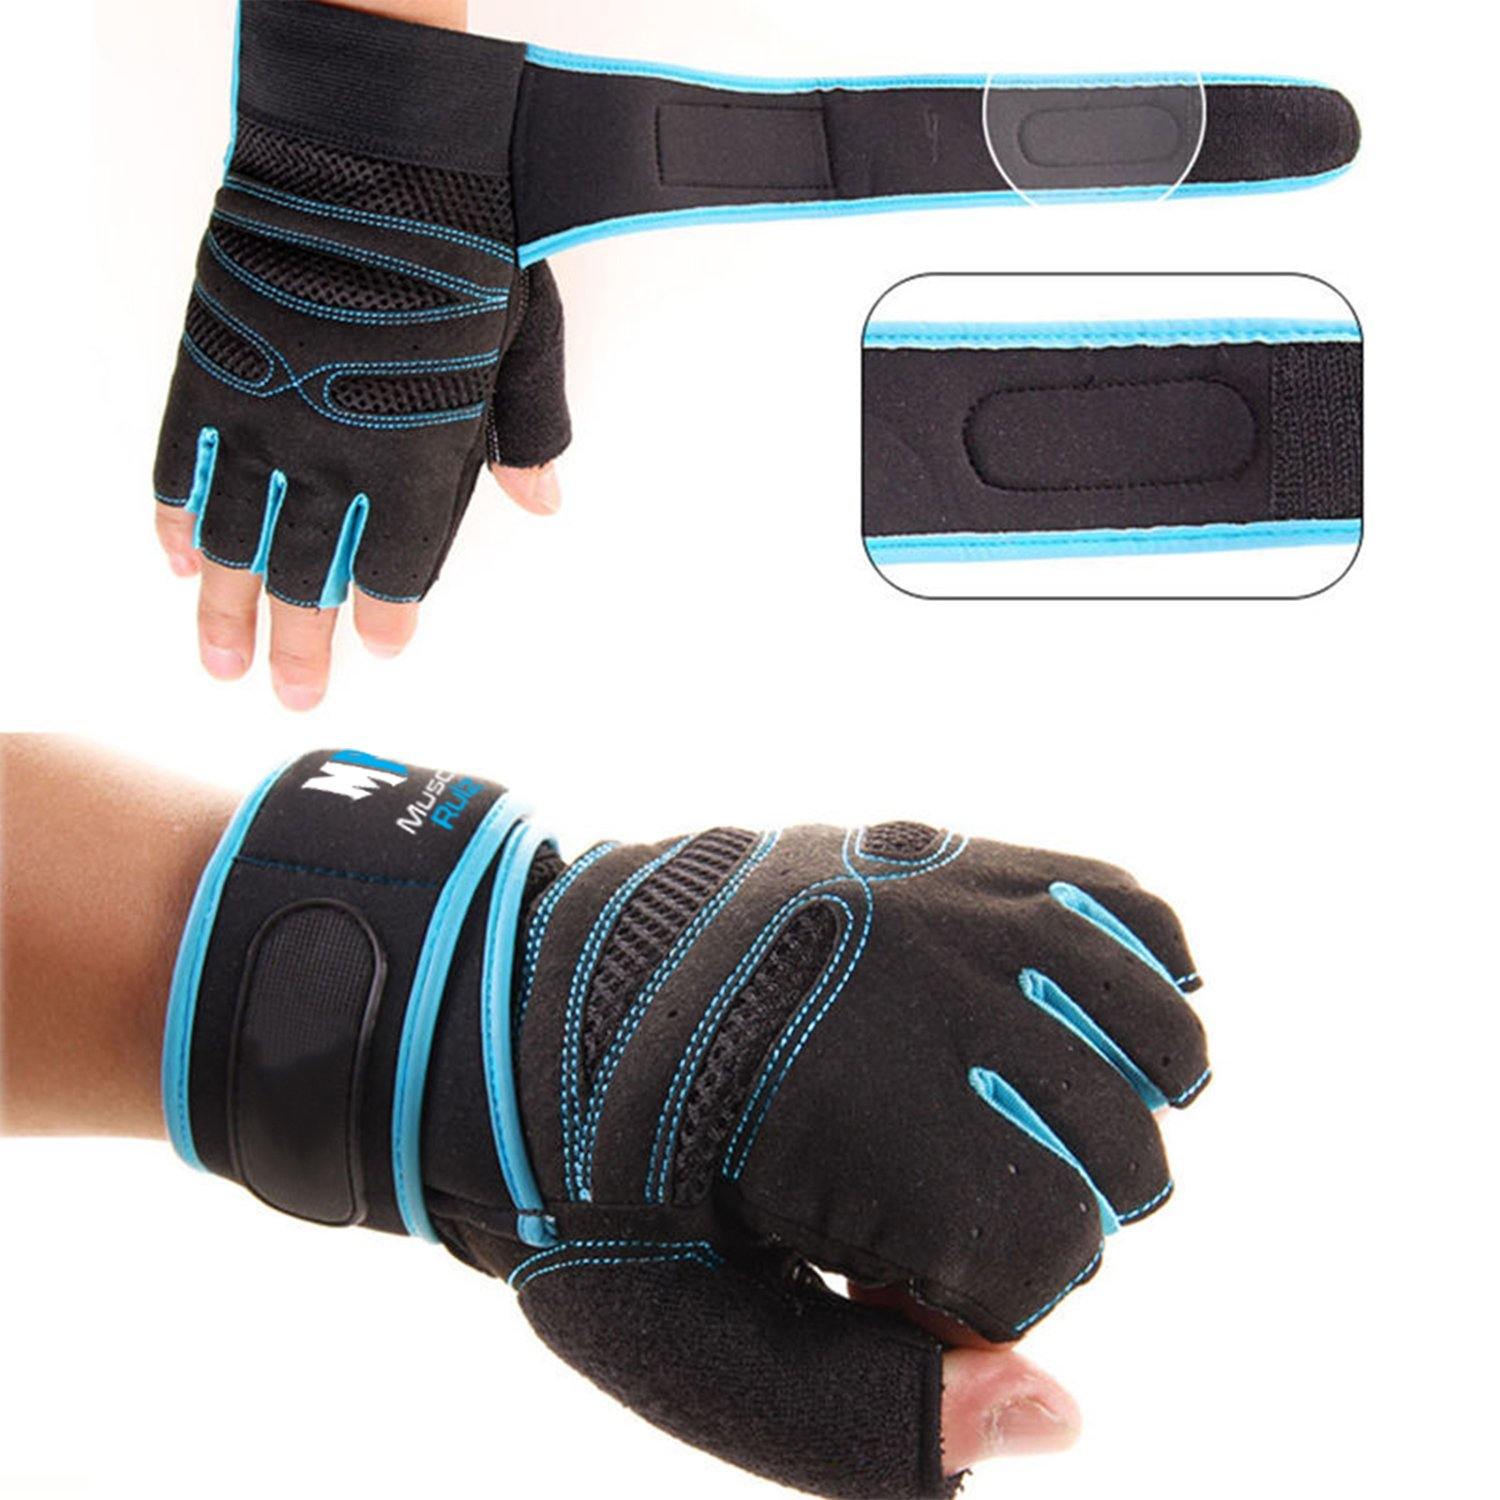 MUSCLE RULZ Gym Workout Gloves for Men Women - JNK Nutrition